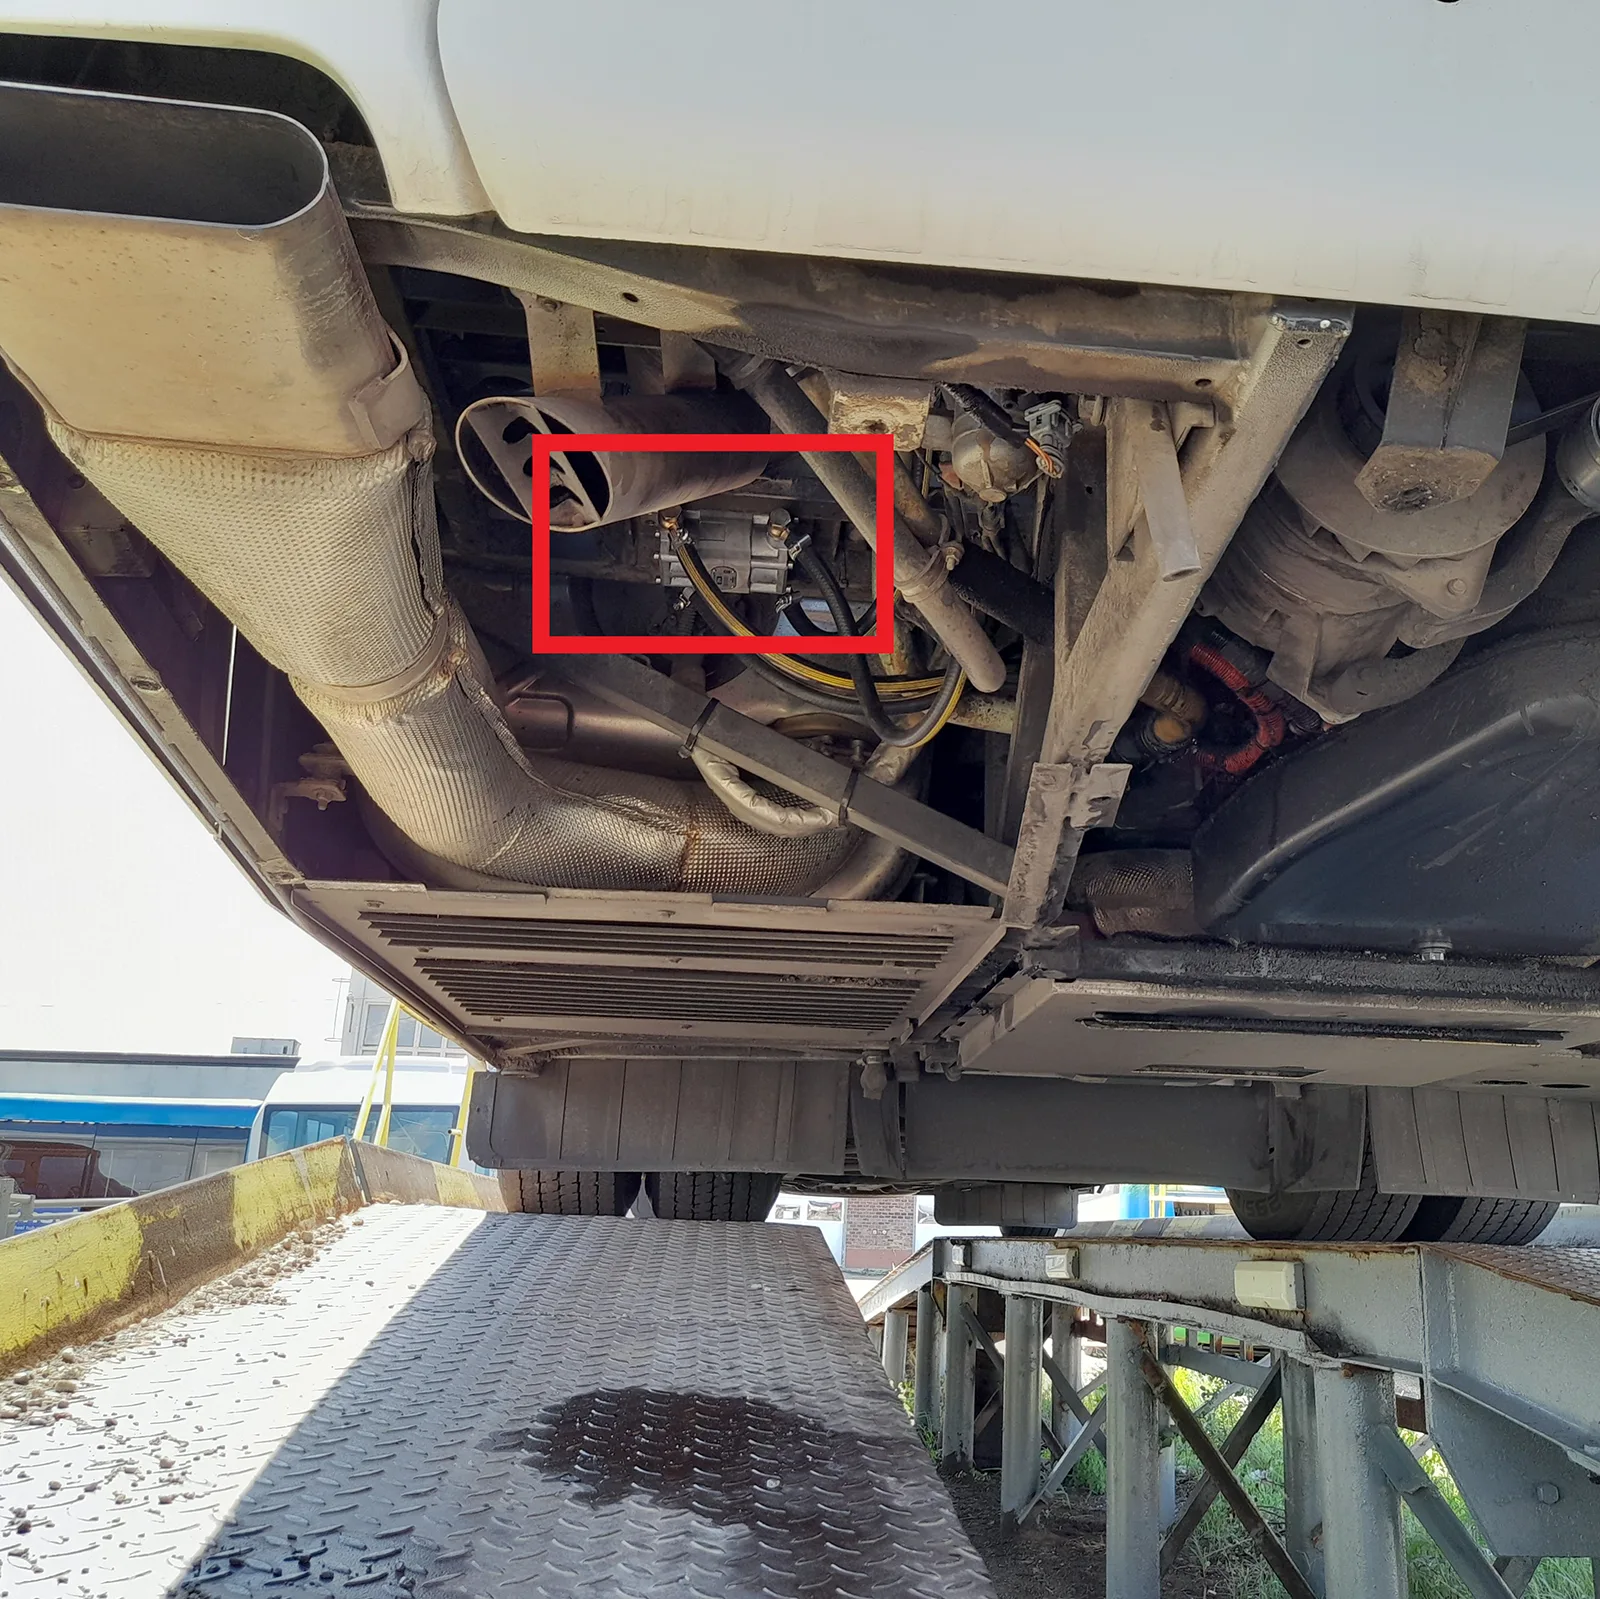 Flow meter is installed at the bottom of the vehicle